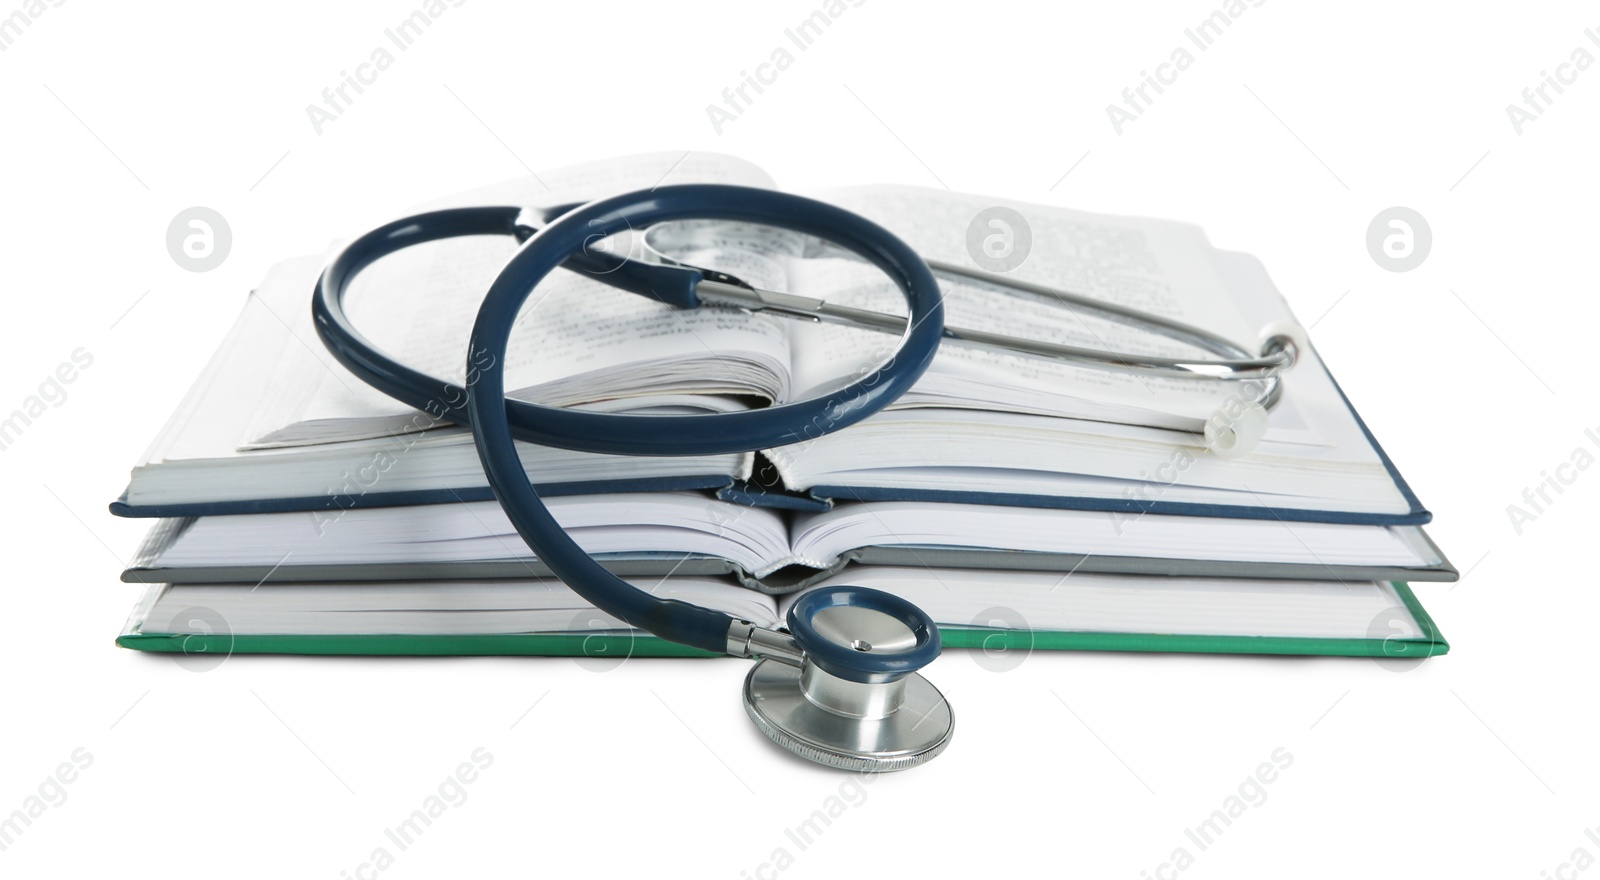 Photo of One new medical stethoscope and books isolated on white